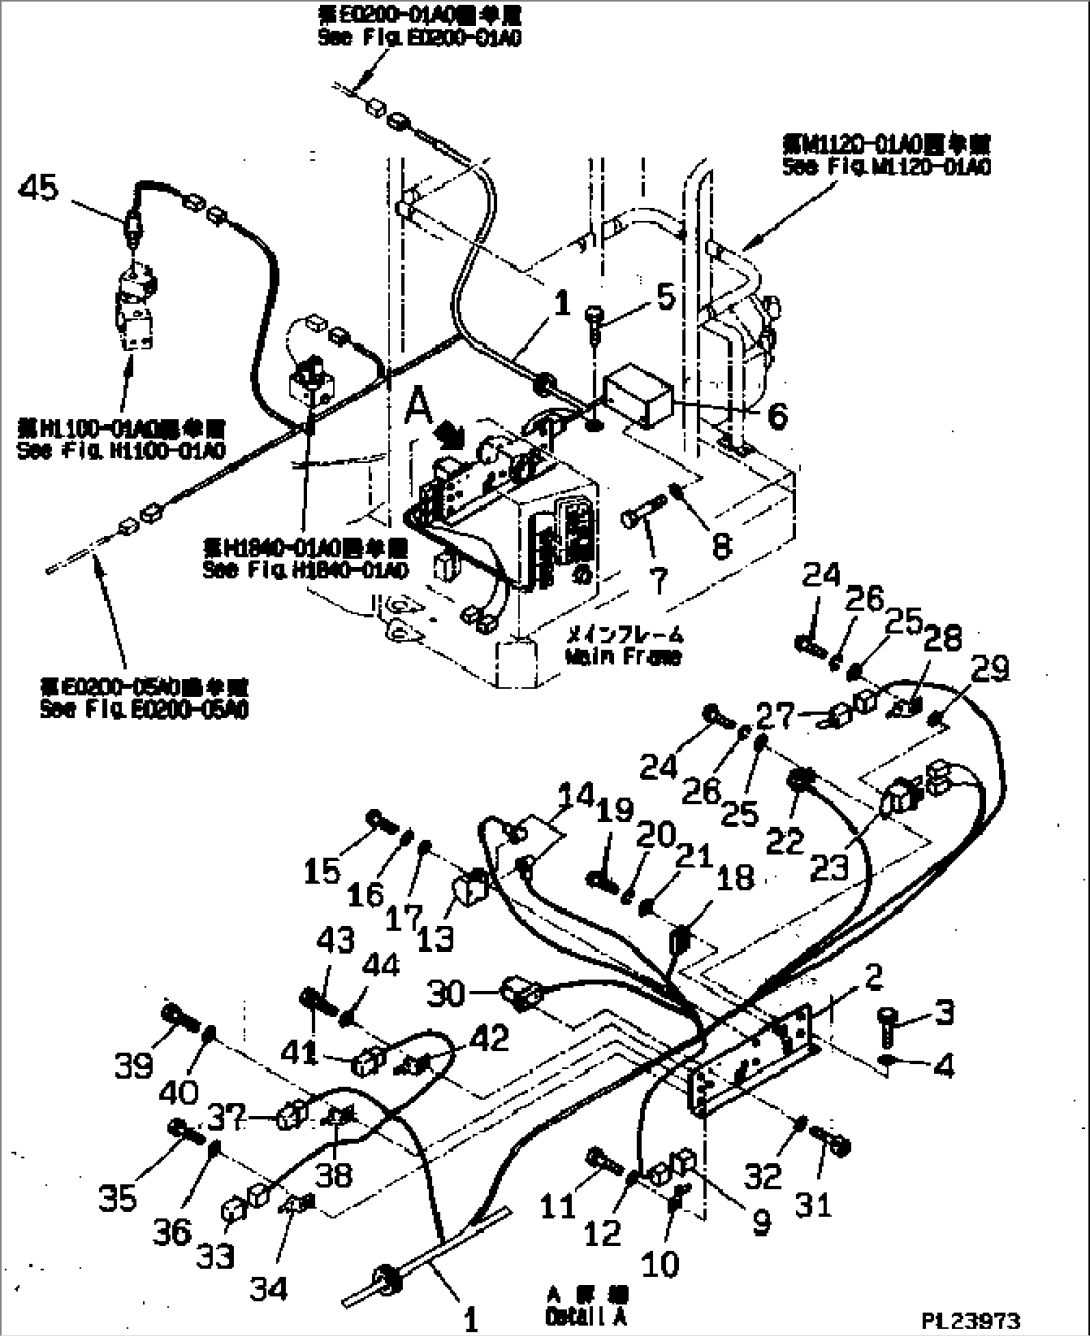 ELECTRICAL SYSTEM (4/5)(INSTRUMENT PANEL AND MAIN LINE)(2/2)